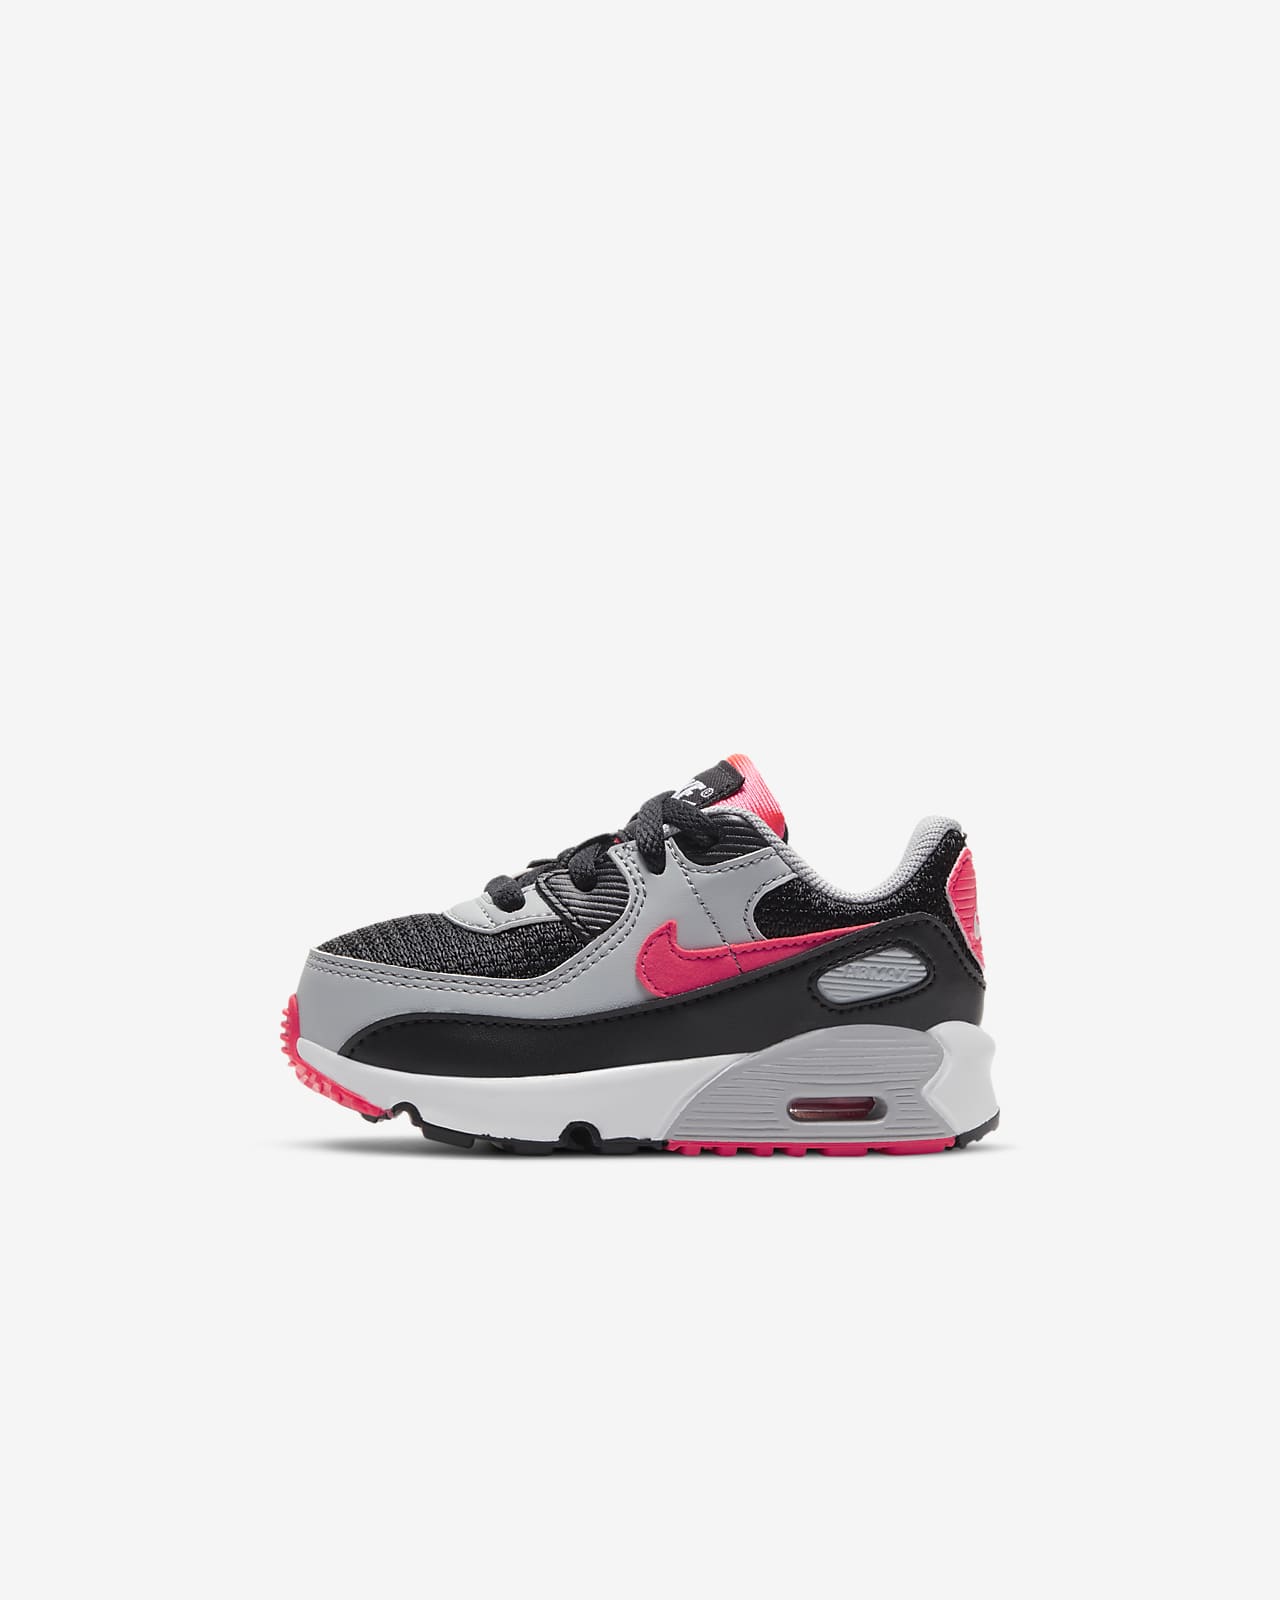 breuk duurzame grondstof attent Nike Air Max 90 LTR Baby/Toddler Shoes. Nike LU